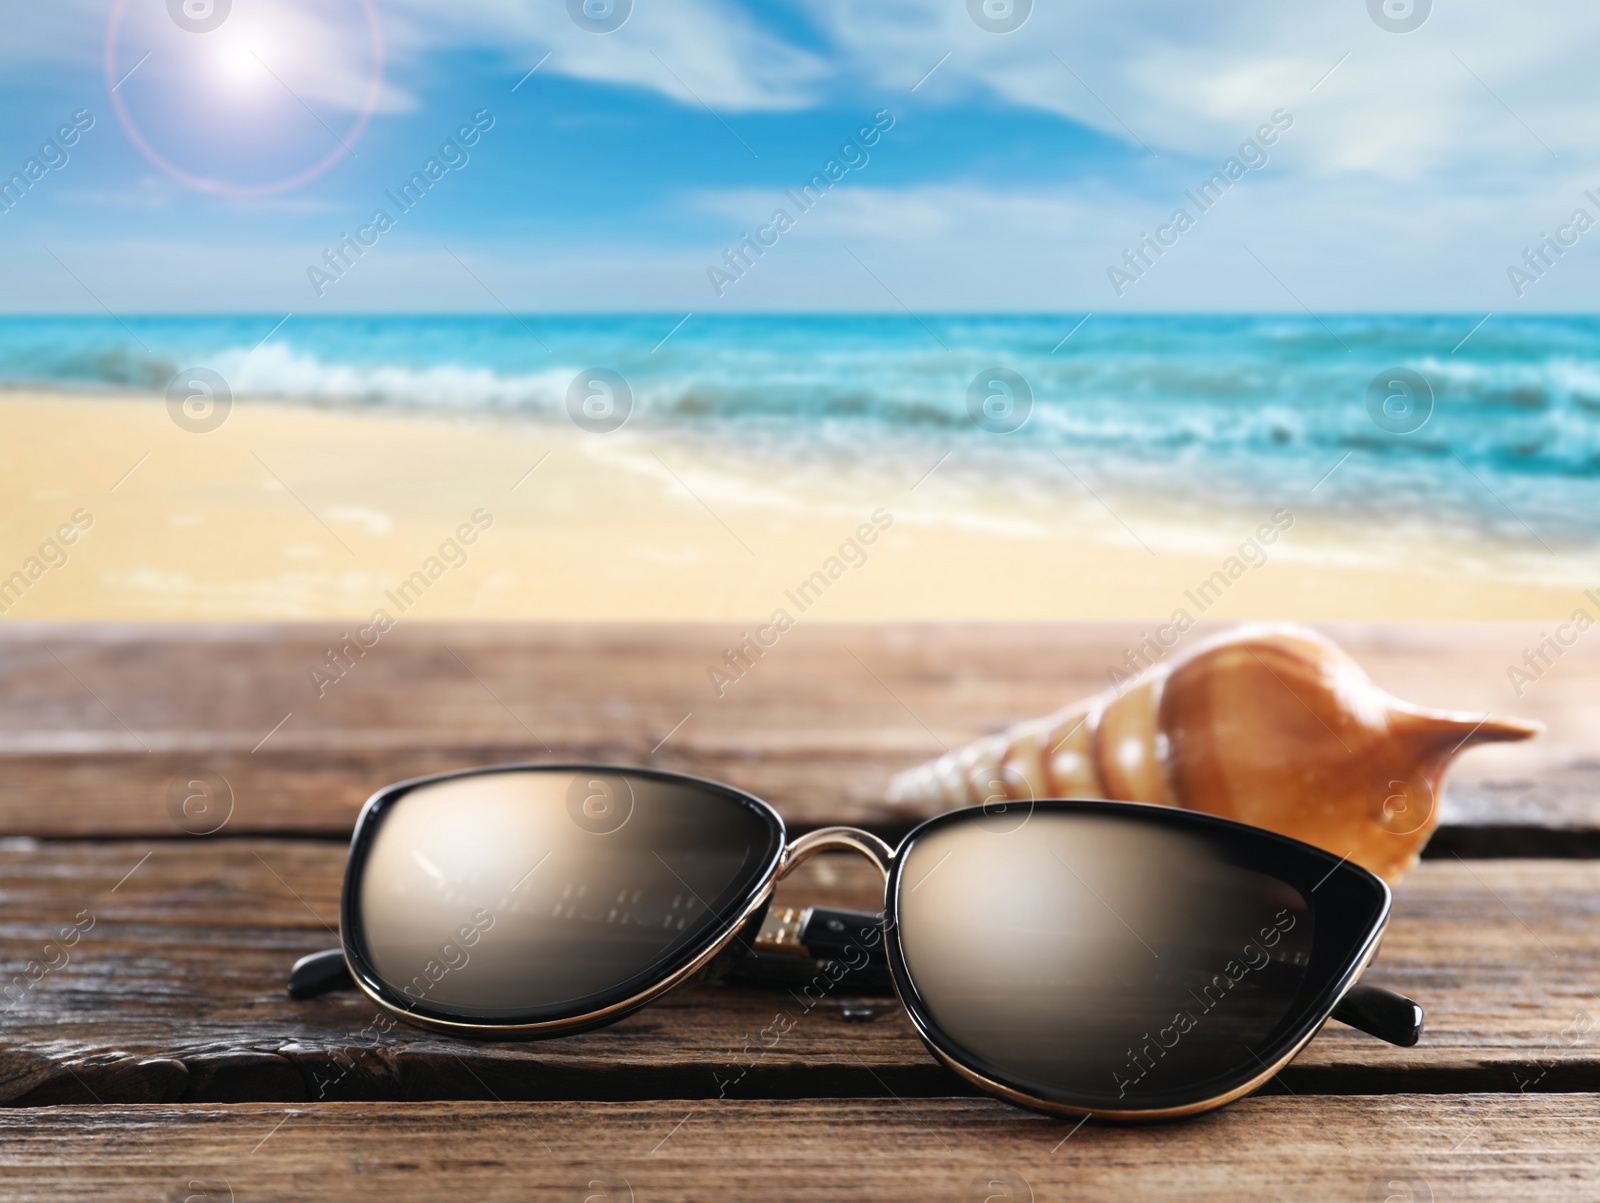 Image of Shell and stylish sunglasses on wooden table near sea with sandy beach